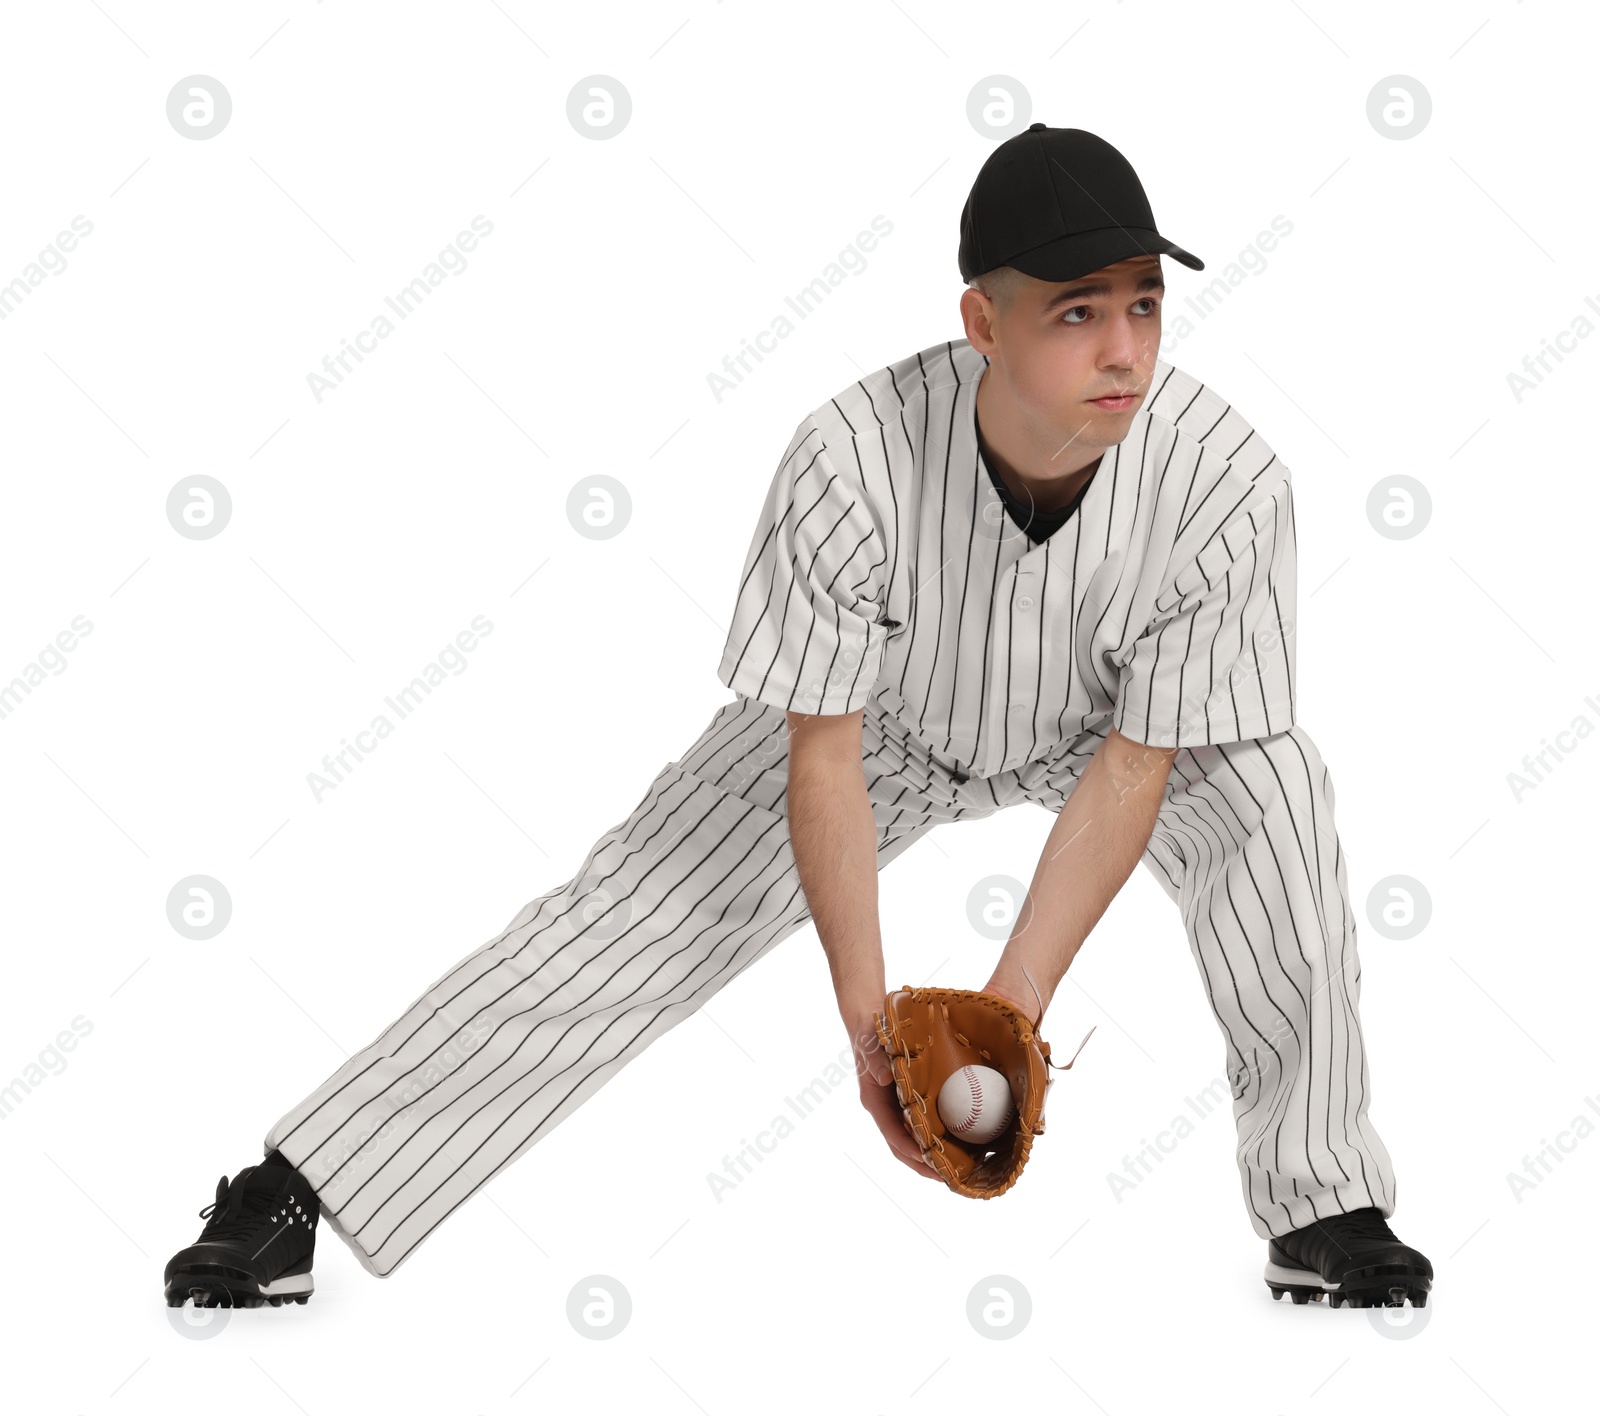 Photo of Baseball player with glove and ball on white background